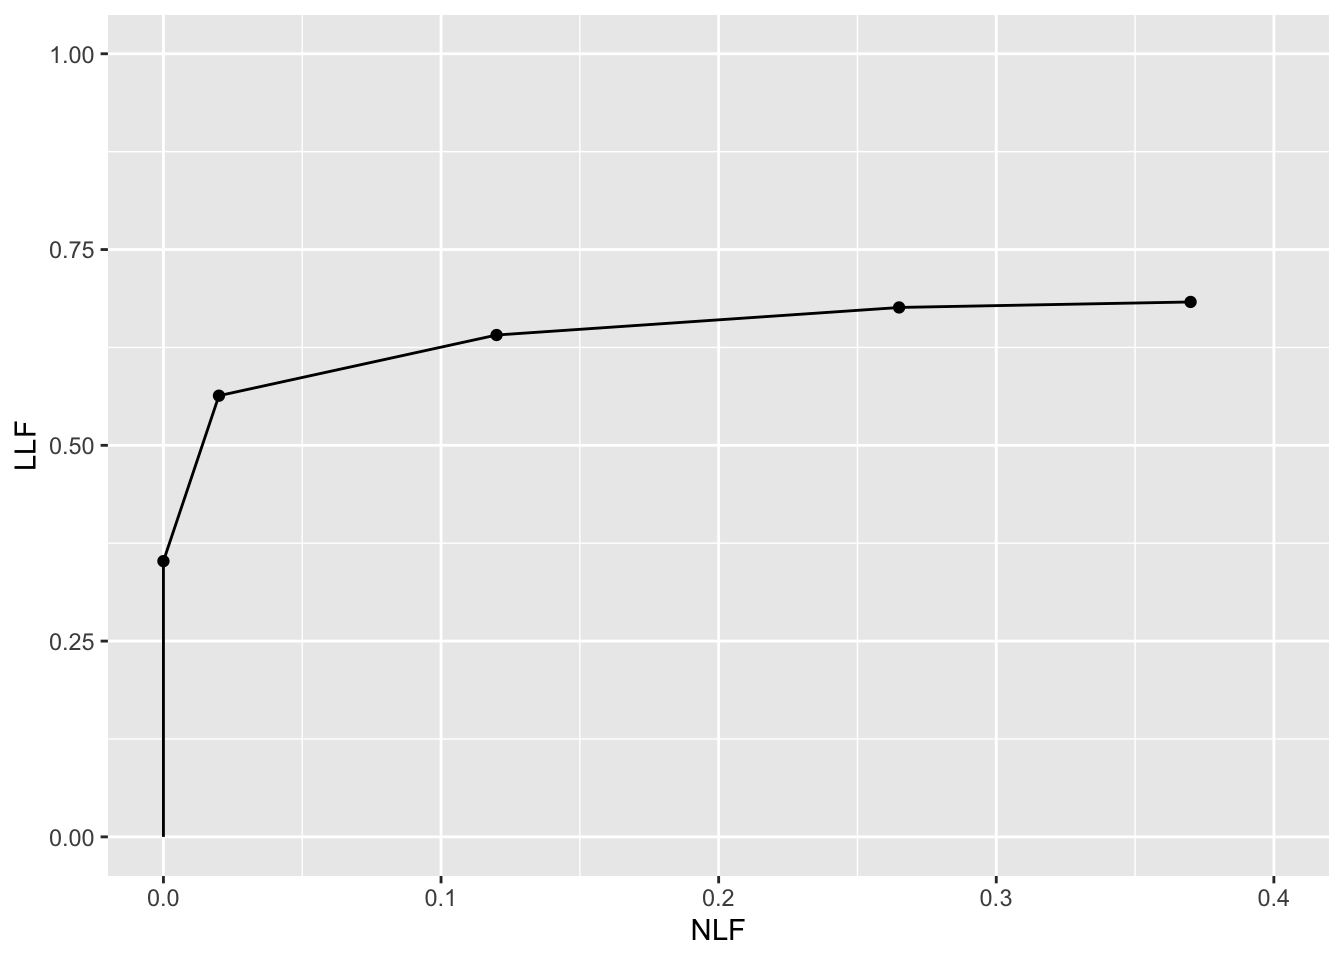 Empirical FROC plot for `dataset04`, treatment 1 and reader 1.